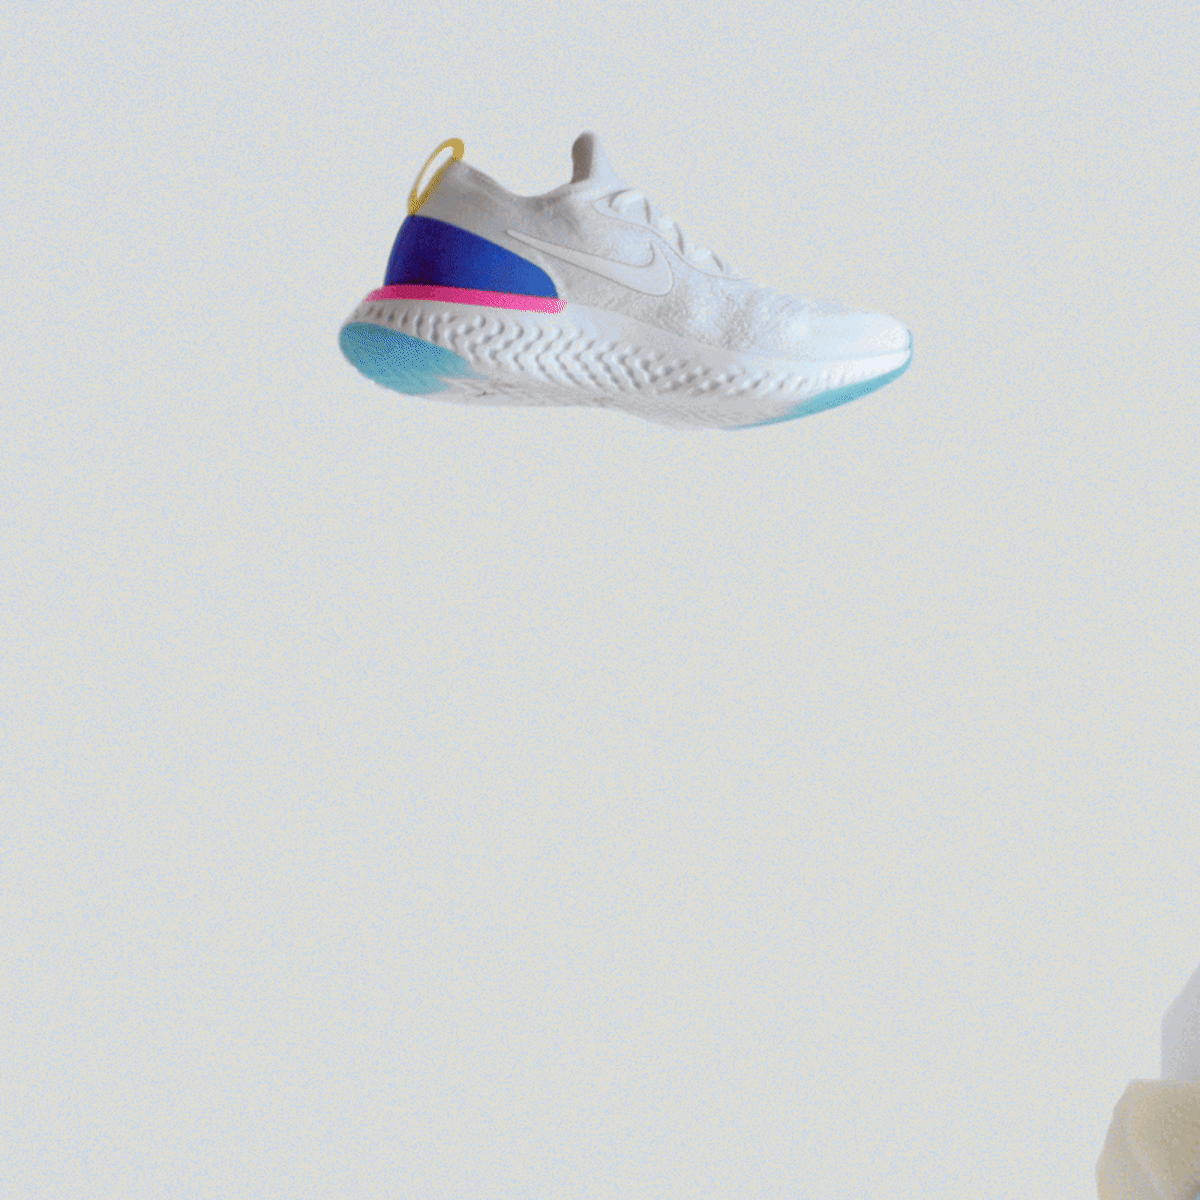 zoom fly or epic react